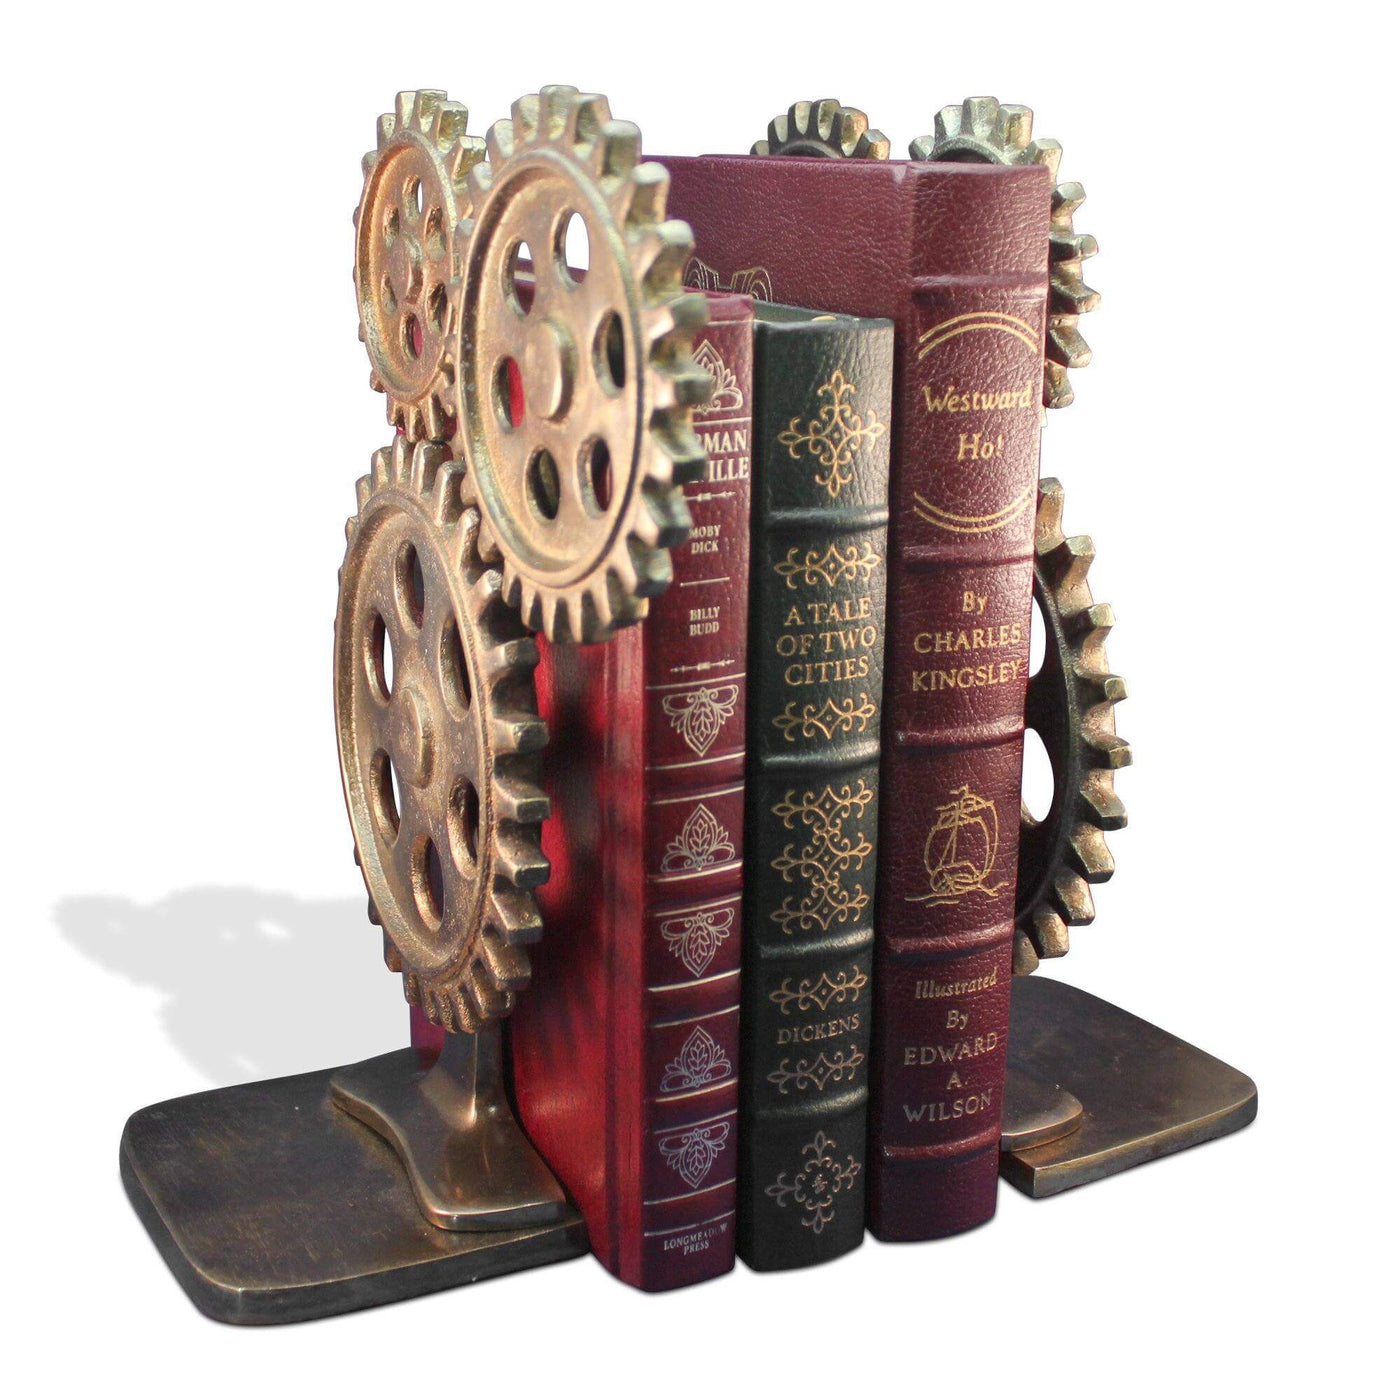 Premium Steampunk Bicycle Sprocket Bookends - Metal Cogs Gears - Pair in partnership with Rustic Deco Incorporated